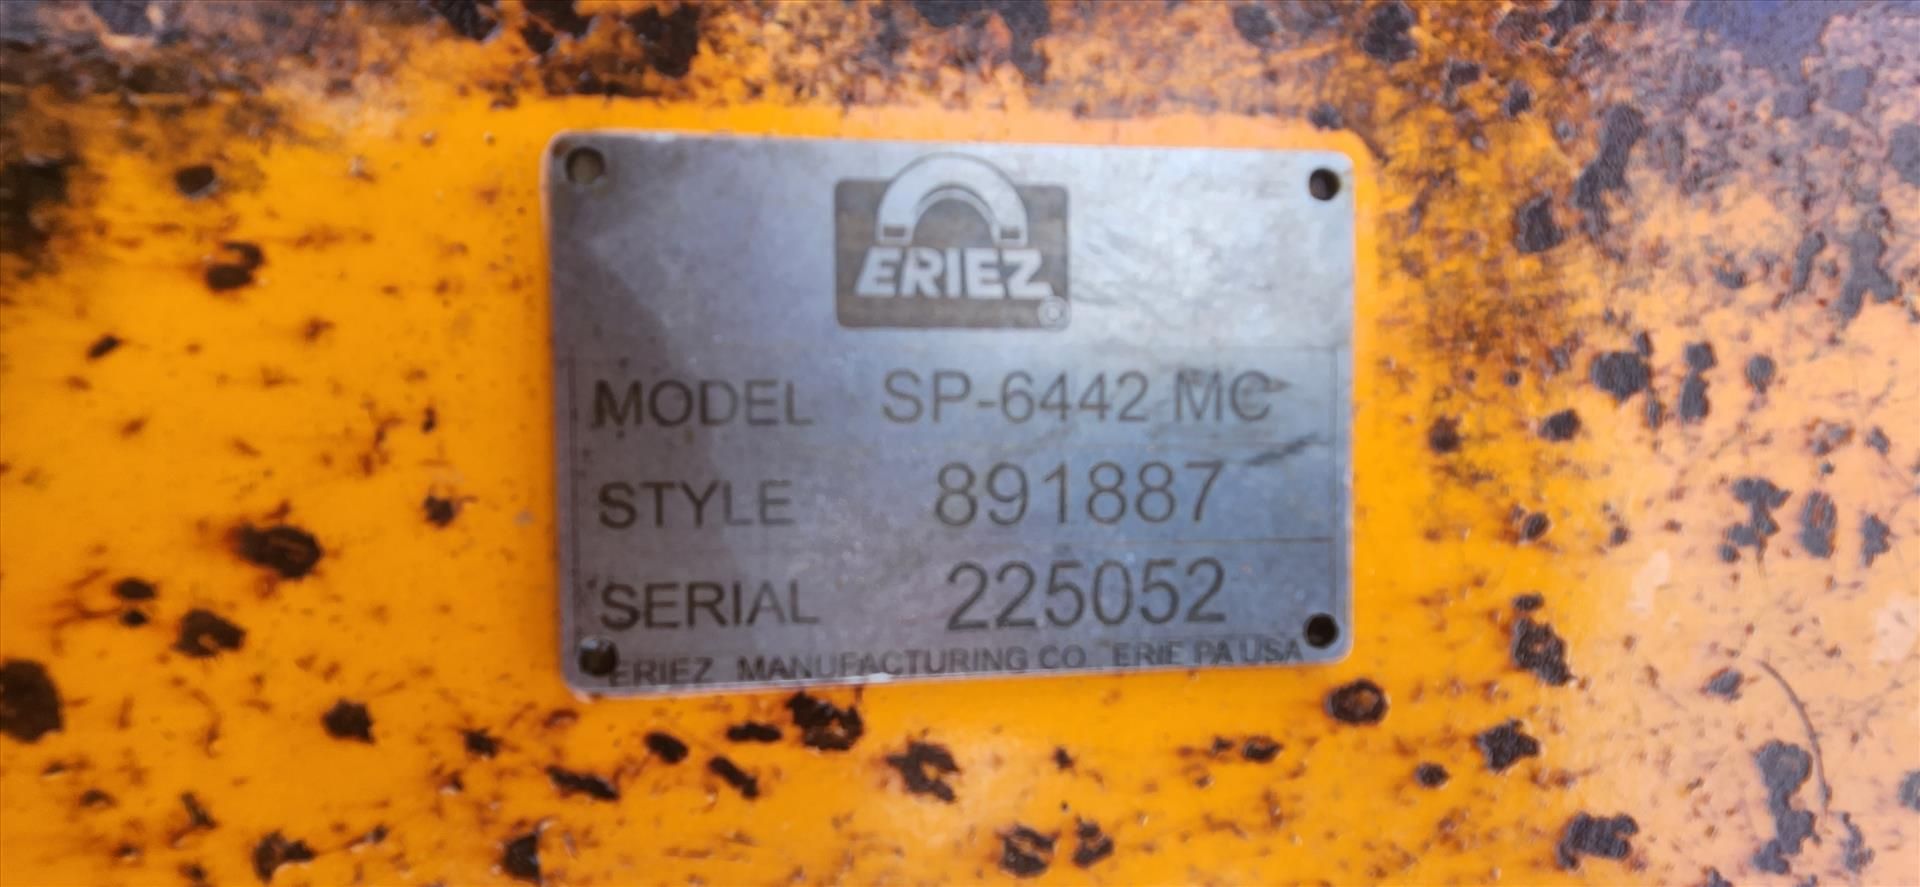 Eriez head pulley magnet, mod. SP-6442 MC c/w stand {Day 2} [TAG 1529] - Image 3 of 3